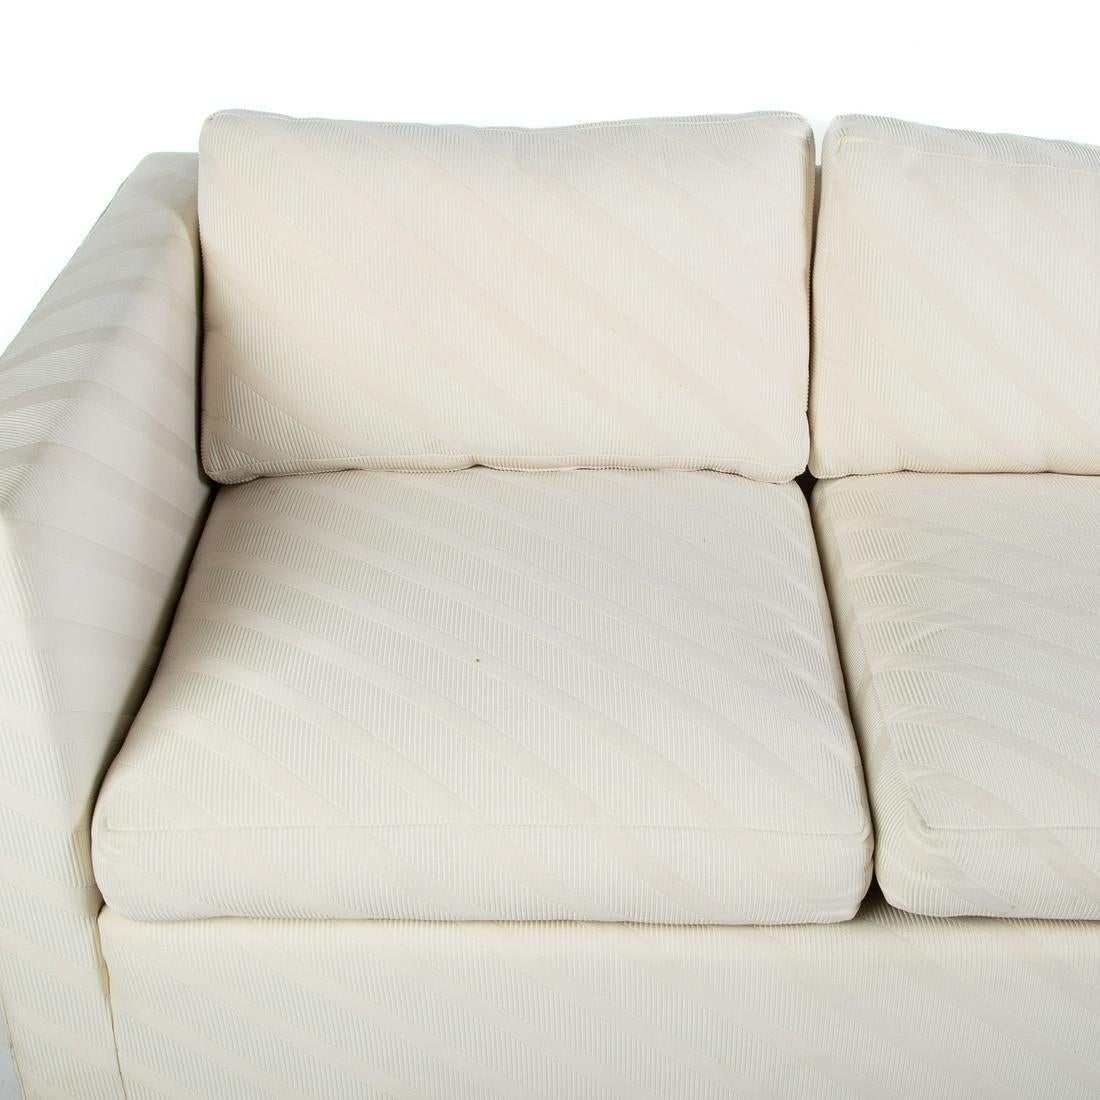 A pair of contemporary three seat sofas in cream tone-on-tone bias stripe fabric. Straight arms and legs with three seat and three back cushions.